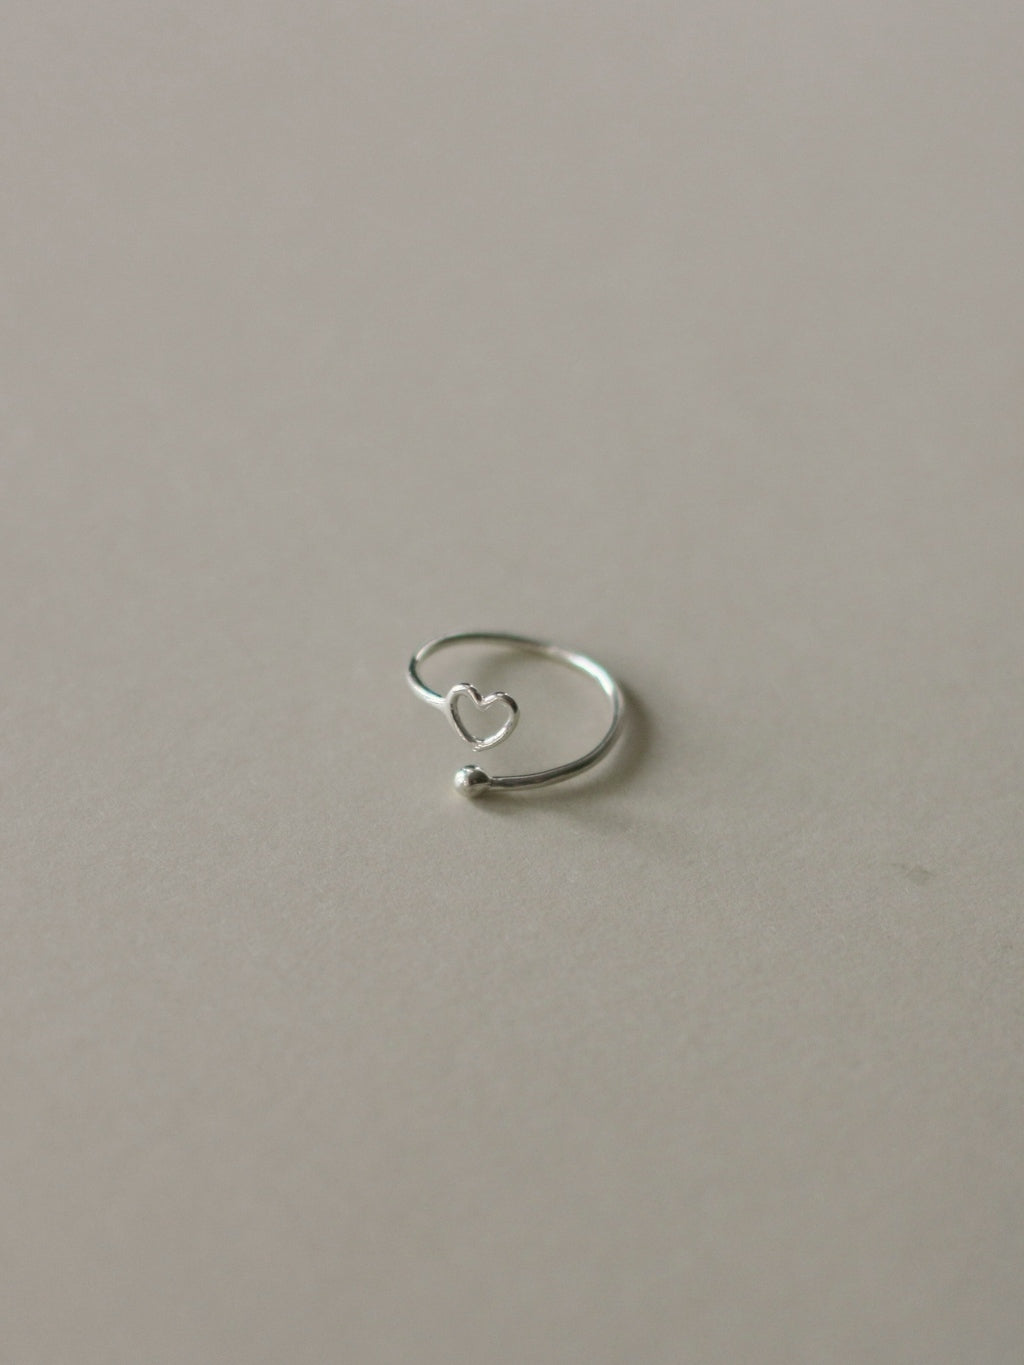 Ring "Little heart" one size